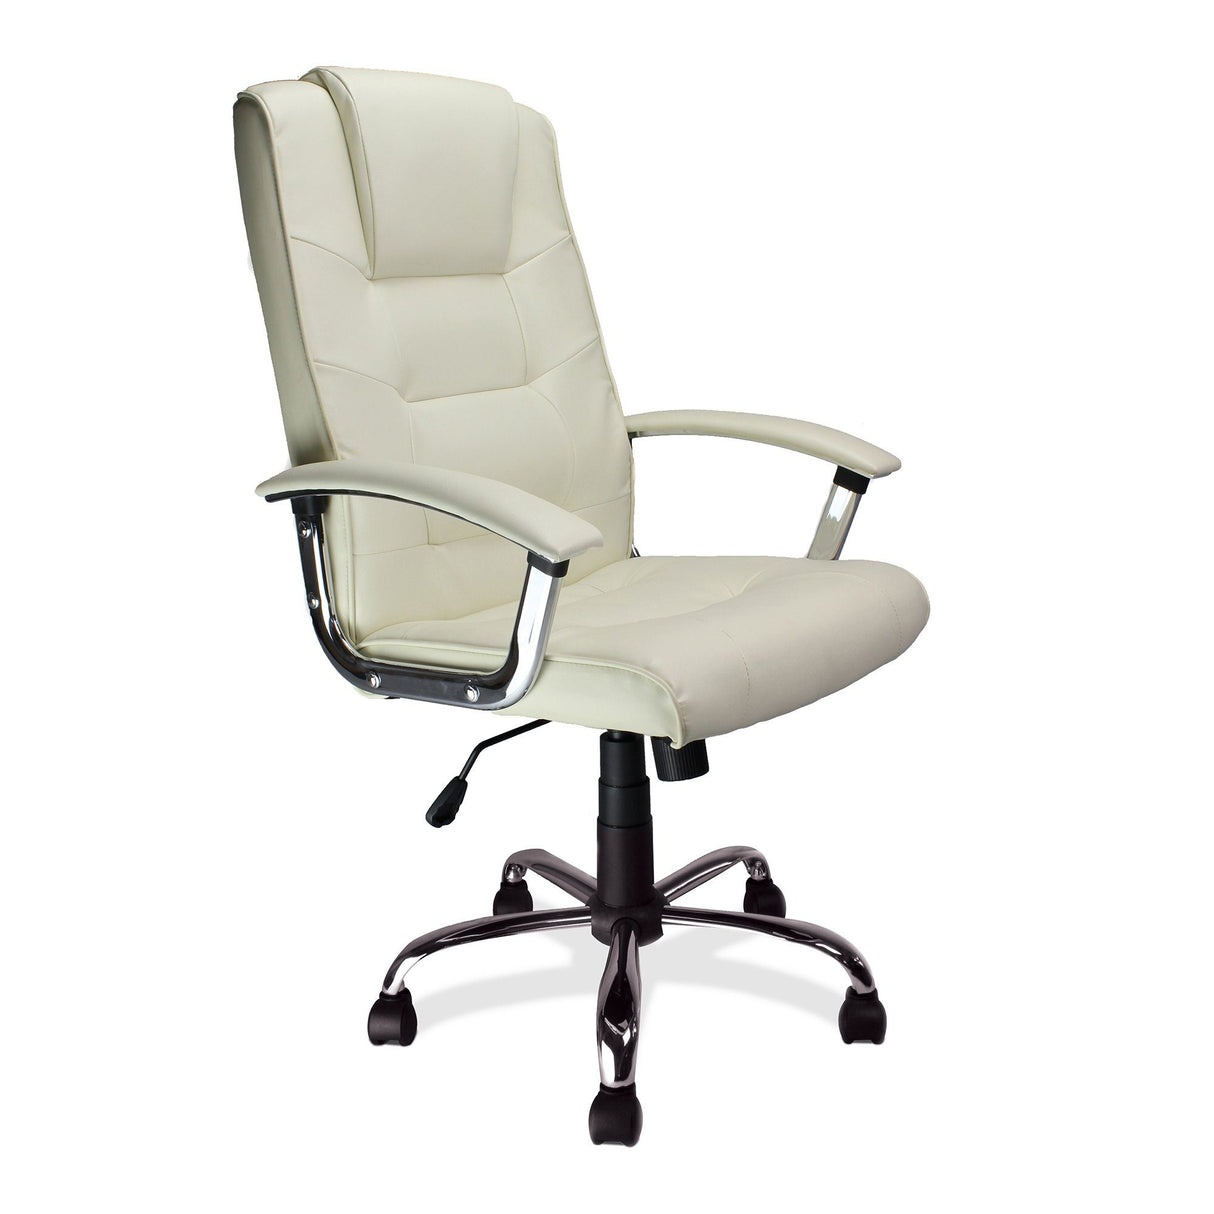 Nautilus Designs Westminster High Back Leather Faced Executive Armchair with Integral Headrest and Chrome Base - Cream